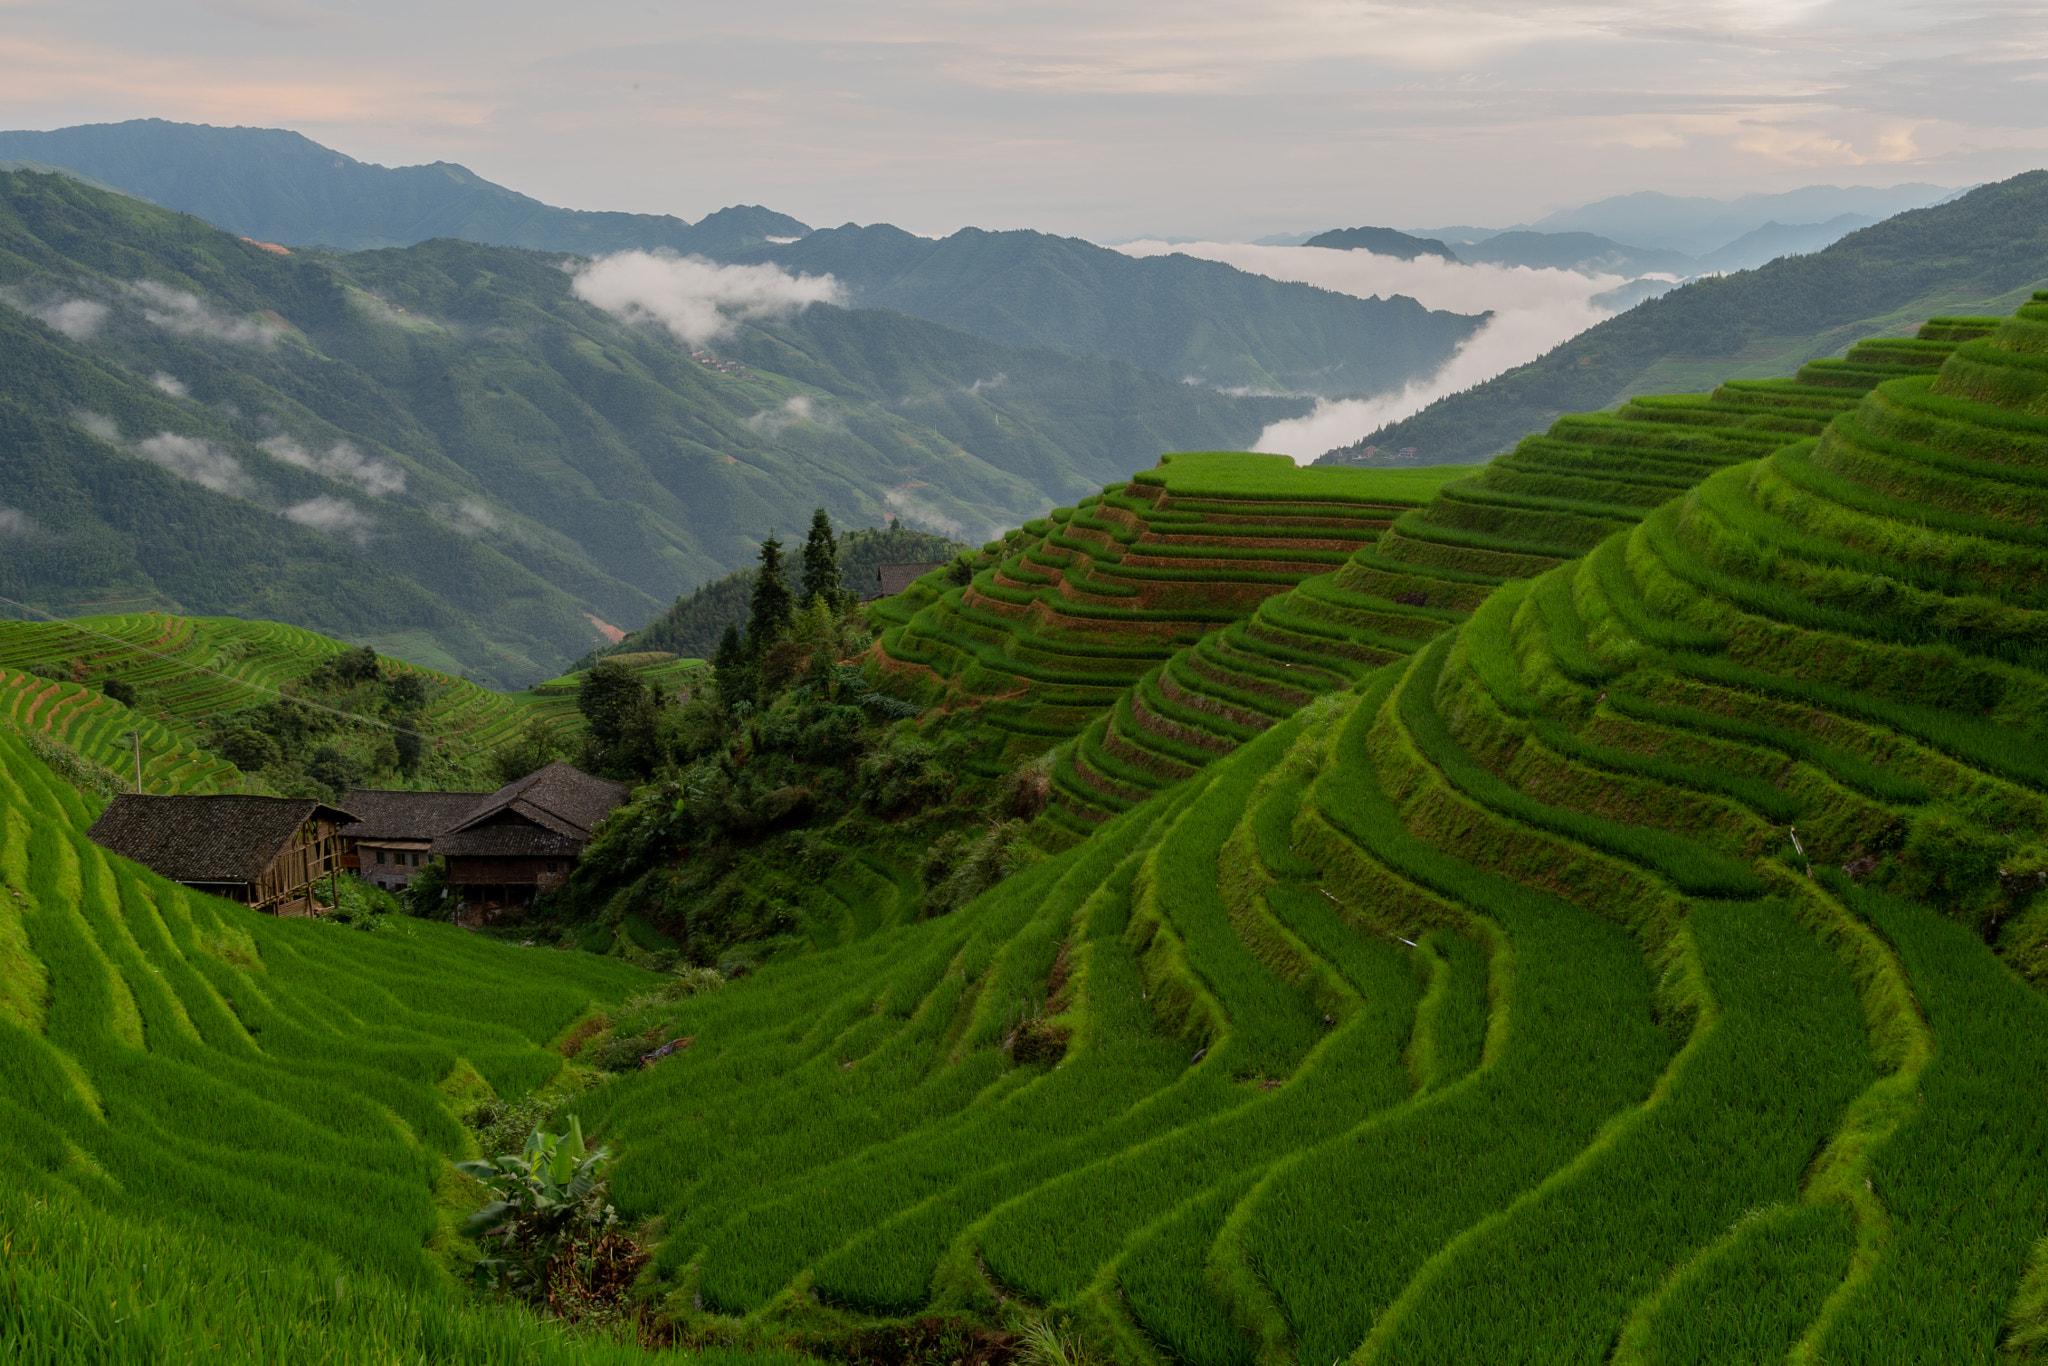 Longji terraces are breathtaking, very much worth the trip.